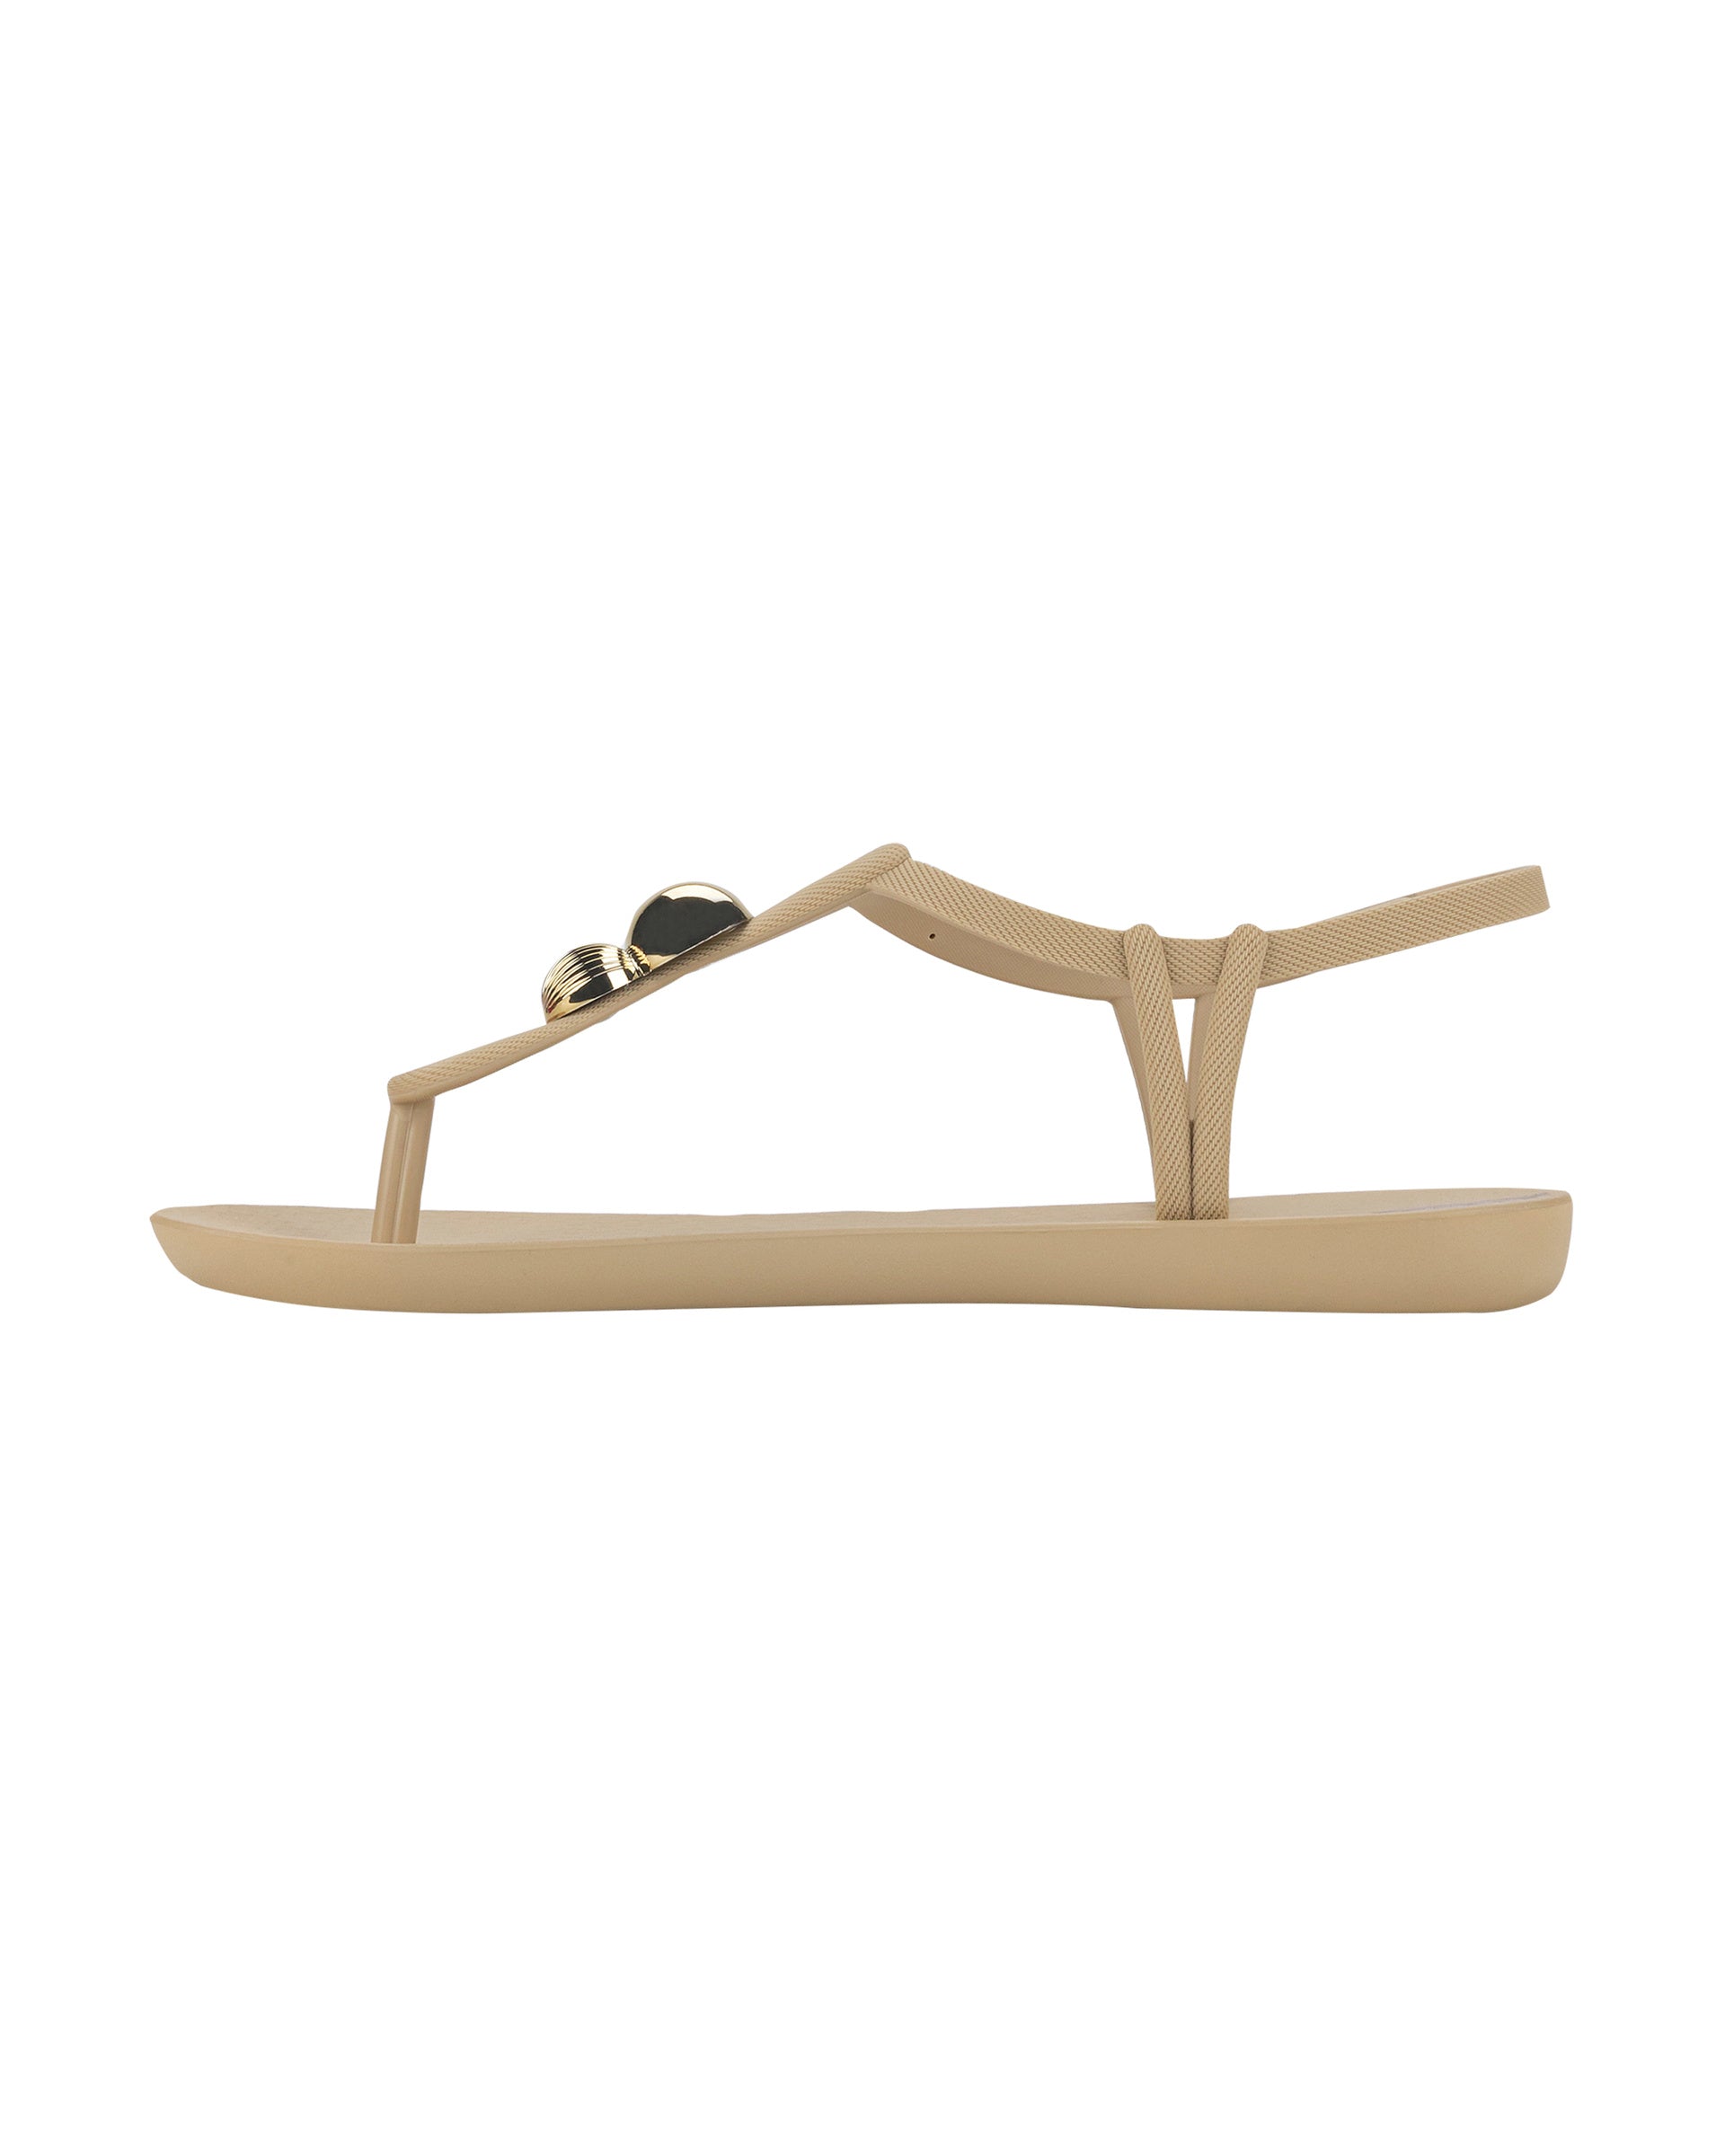 Inner side view of a beige Ipanema Class Spheres women's t-strap sandal with metallic bauble.